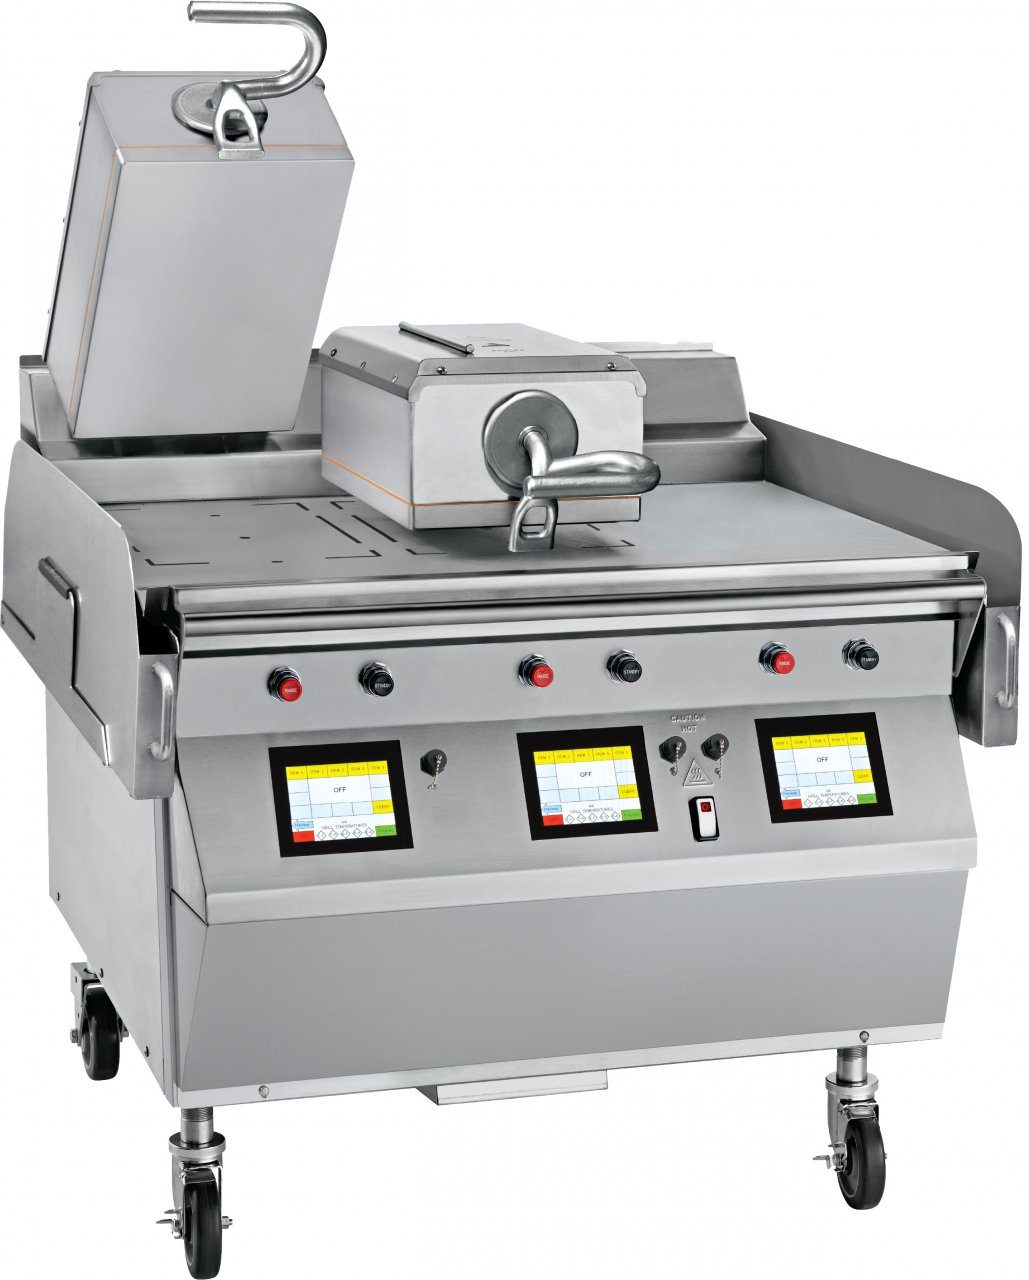 Two-Sided Commercial Grills: Here to Elevate Your QSR 1